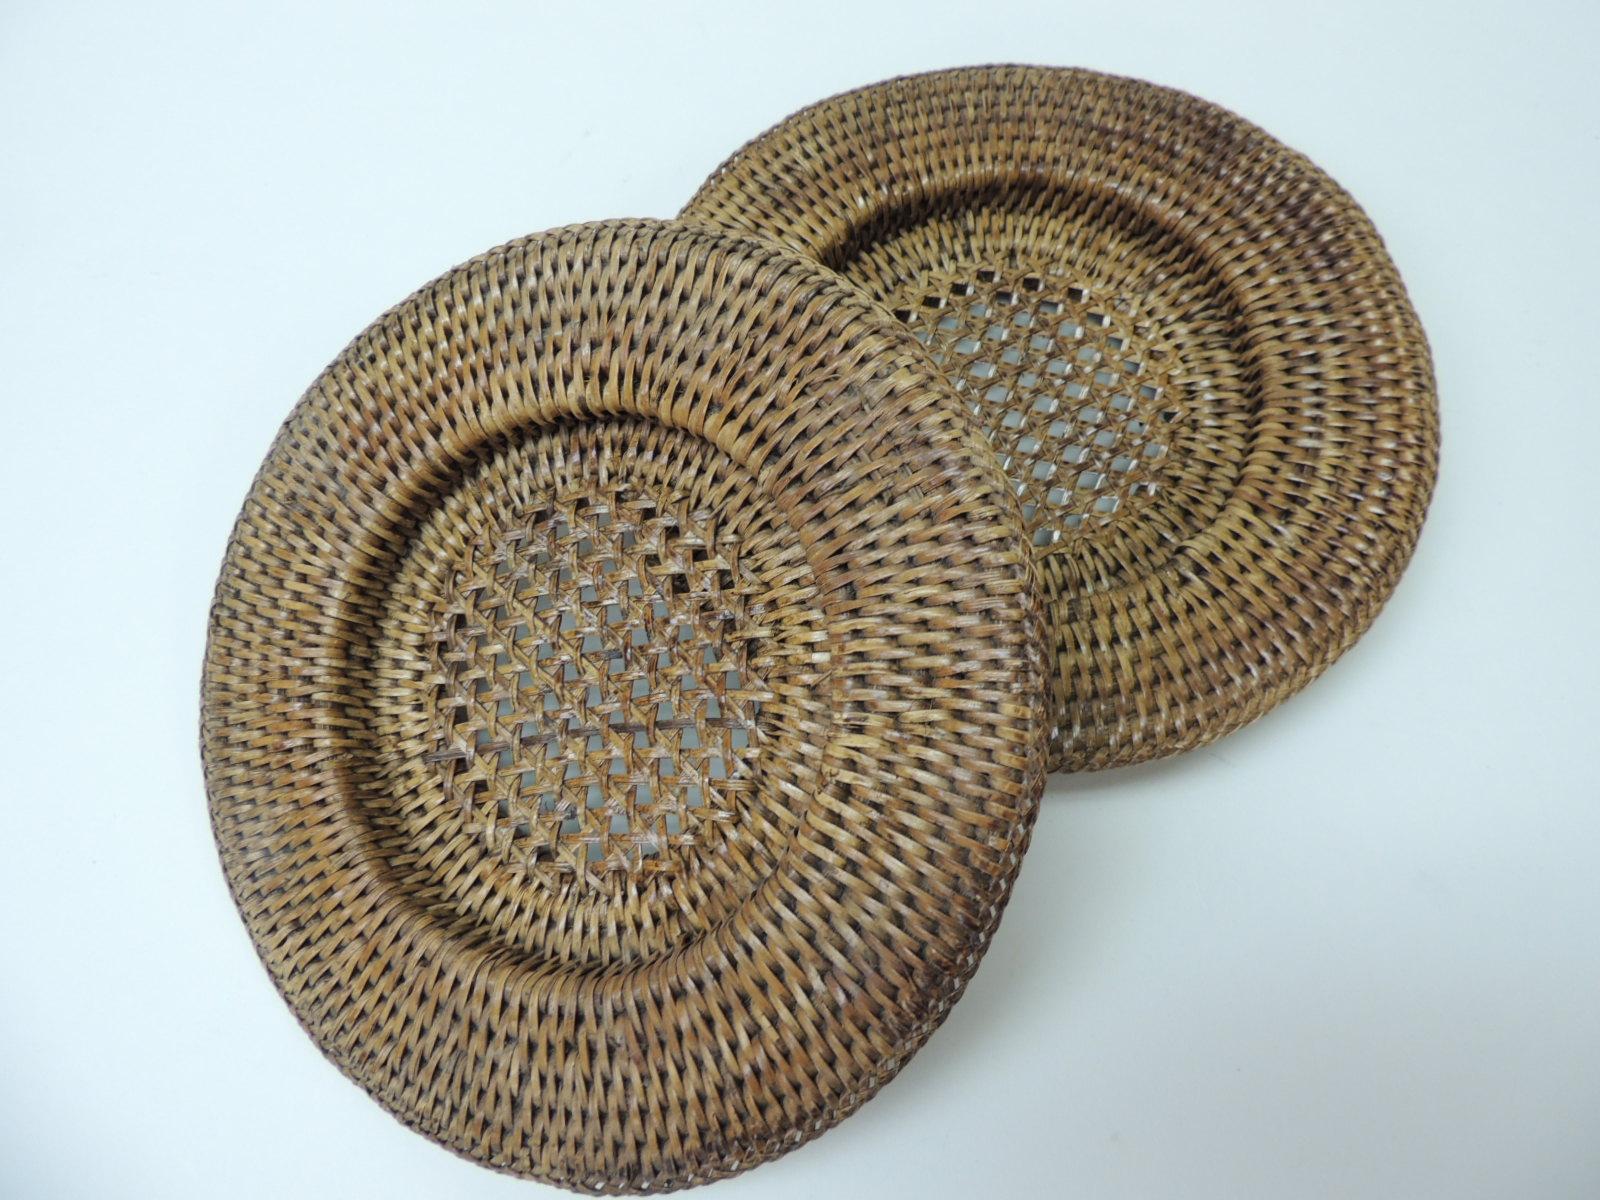 Indonesian Pair of Vintage Rattan Woven Wine Bottle Coasters